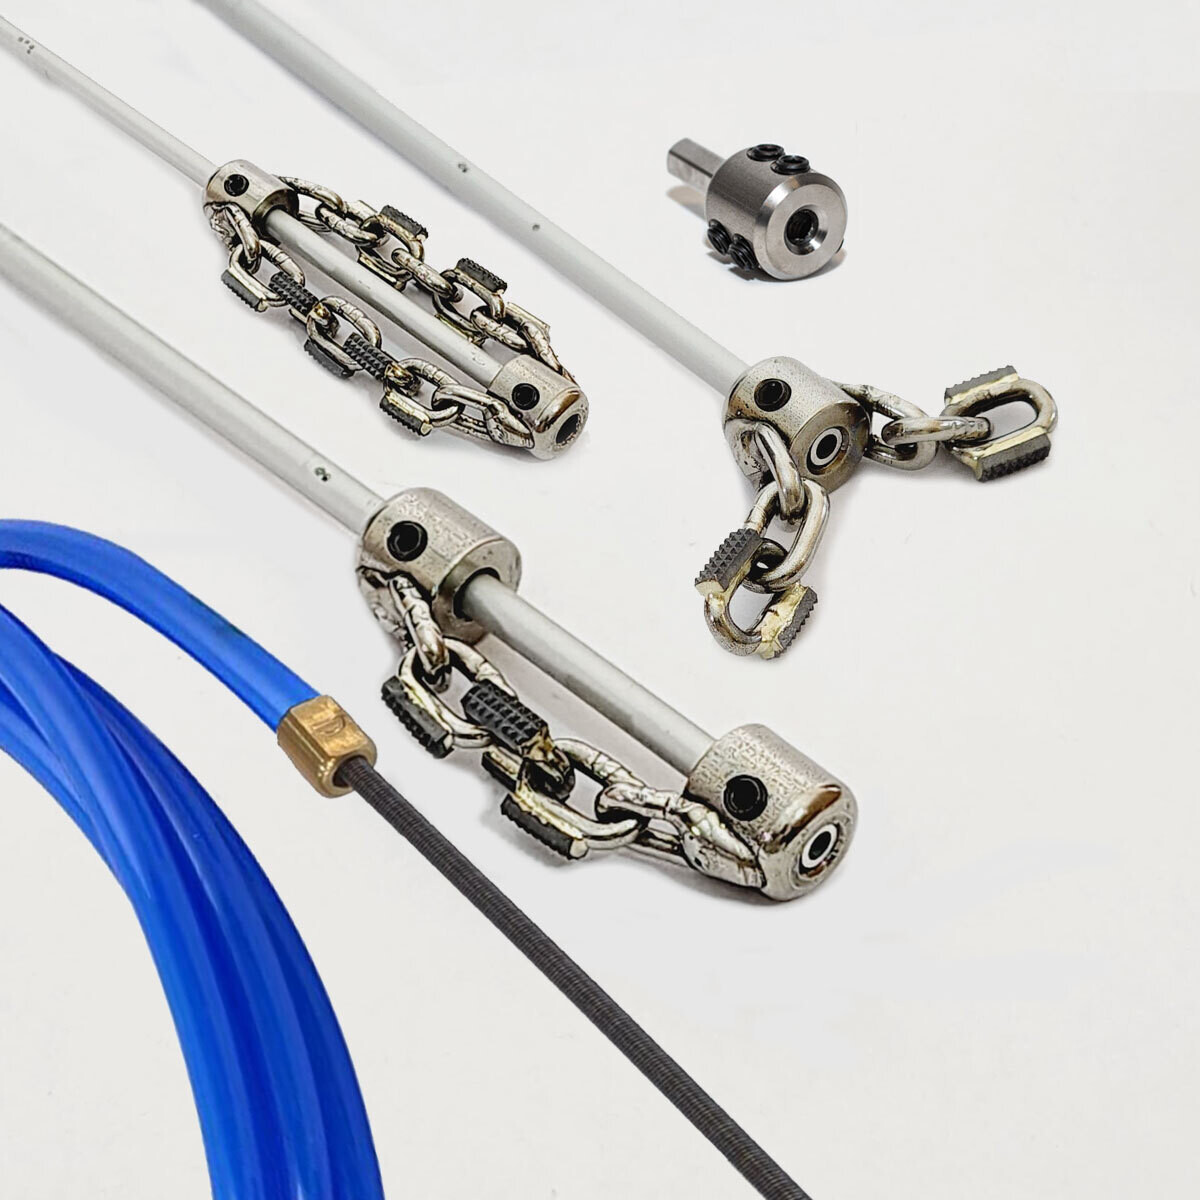 This is a plumbing snake kit with cyclone chain and tiger chain.